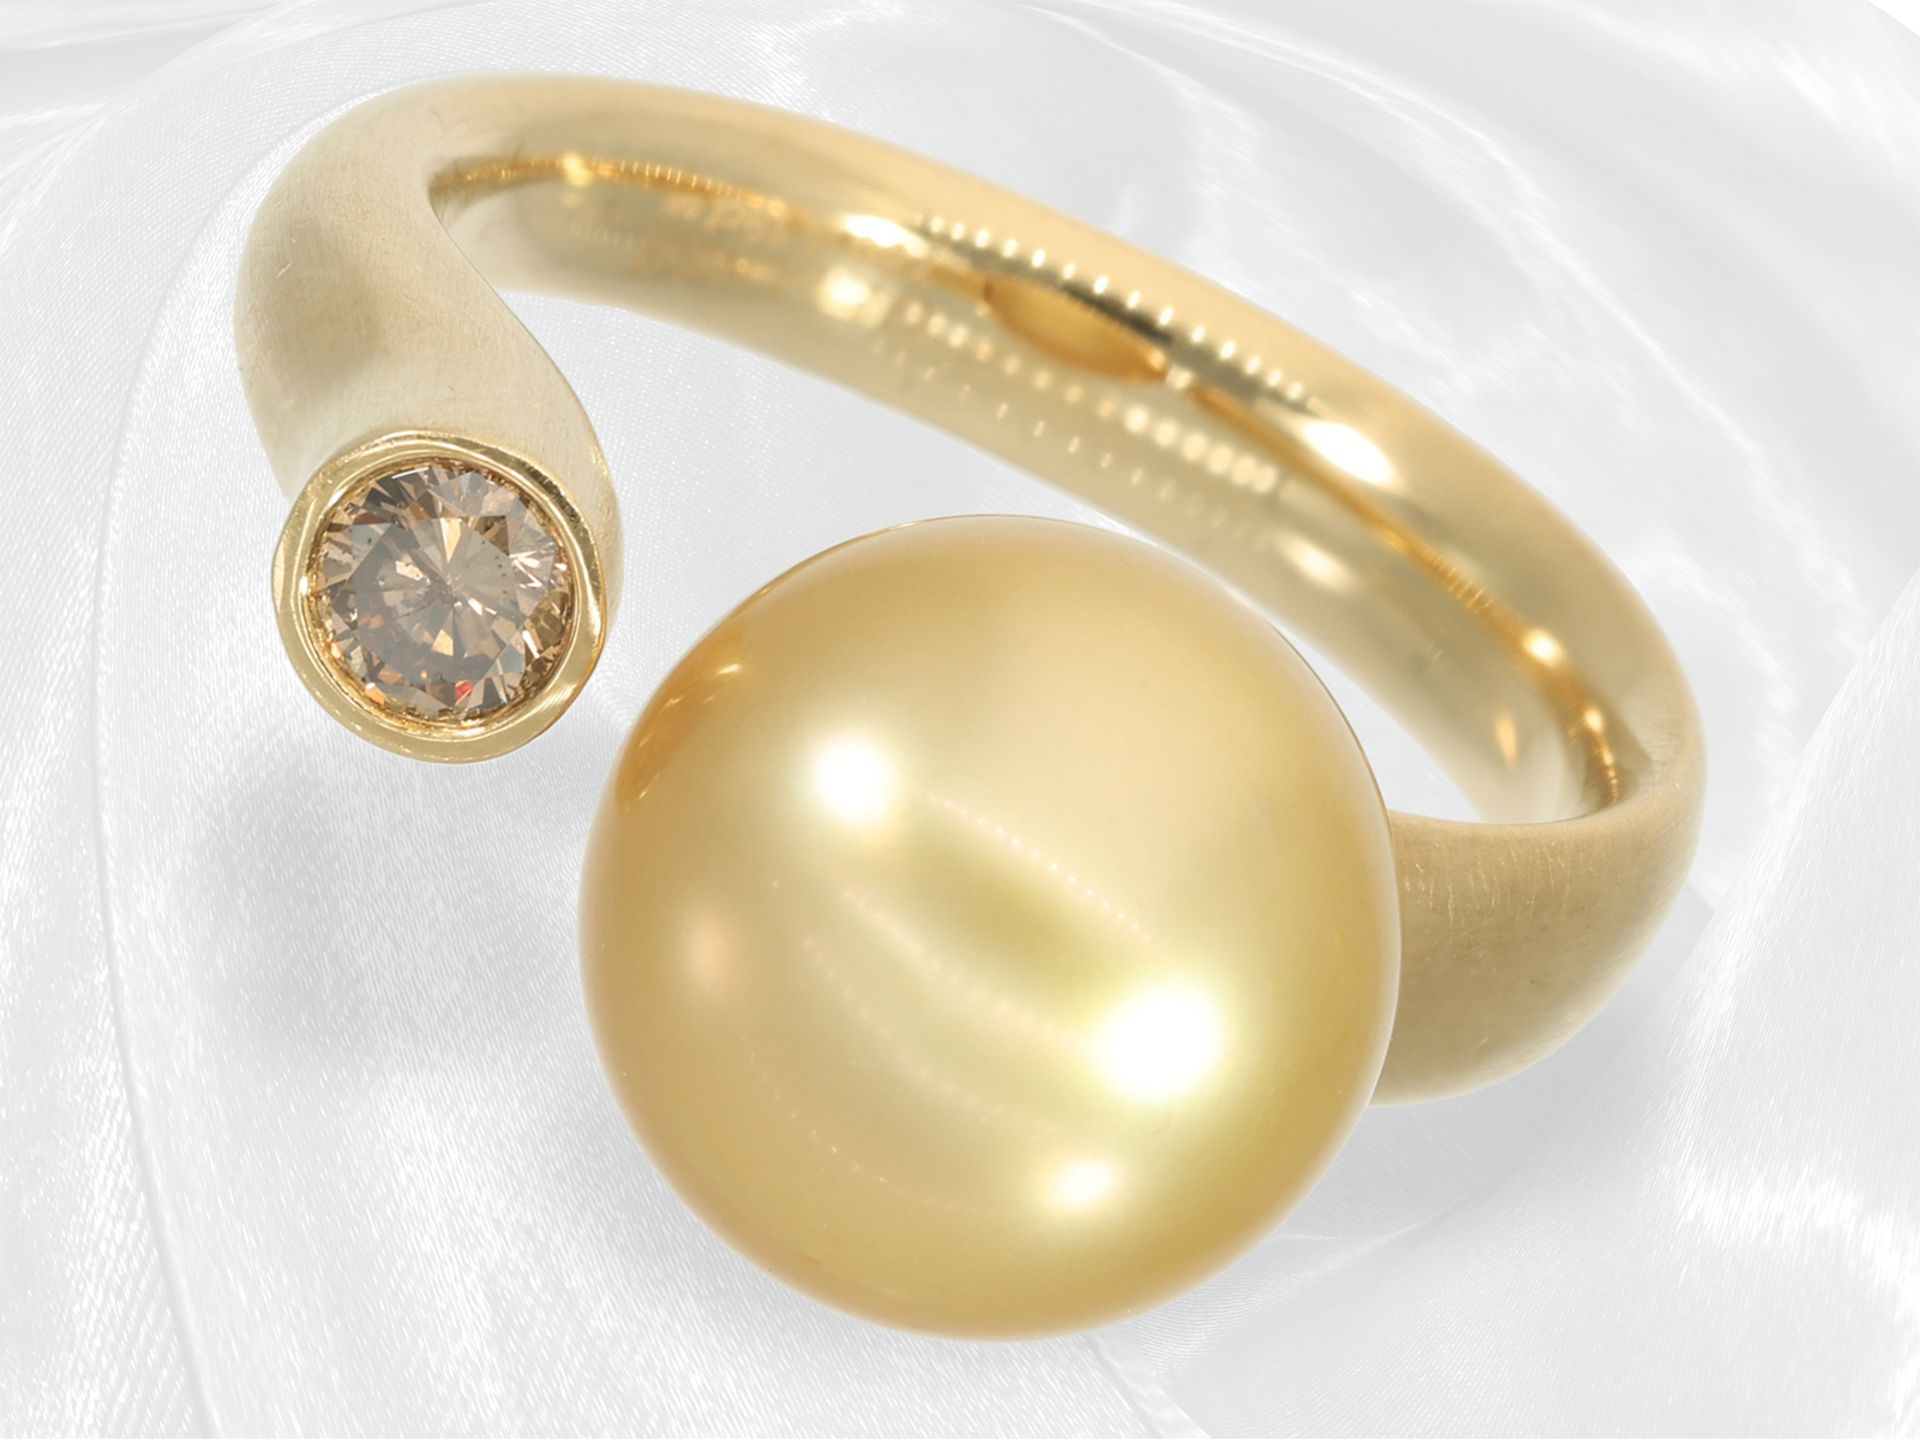 Elaborately crafted, high-quality designer ladies' ring with finest South Sea pearl and fancy diamon